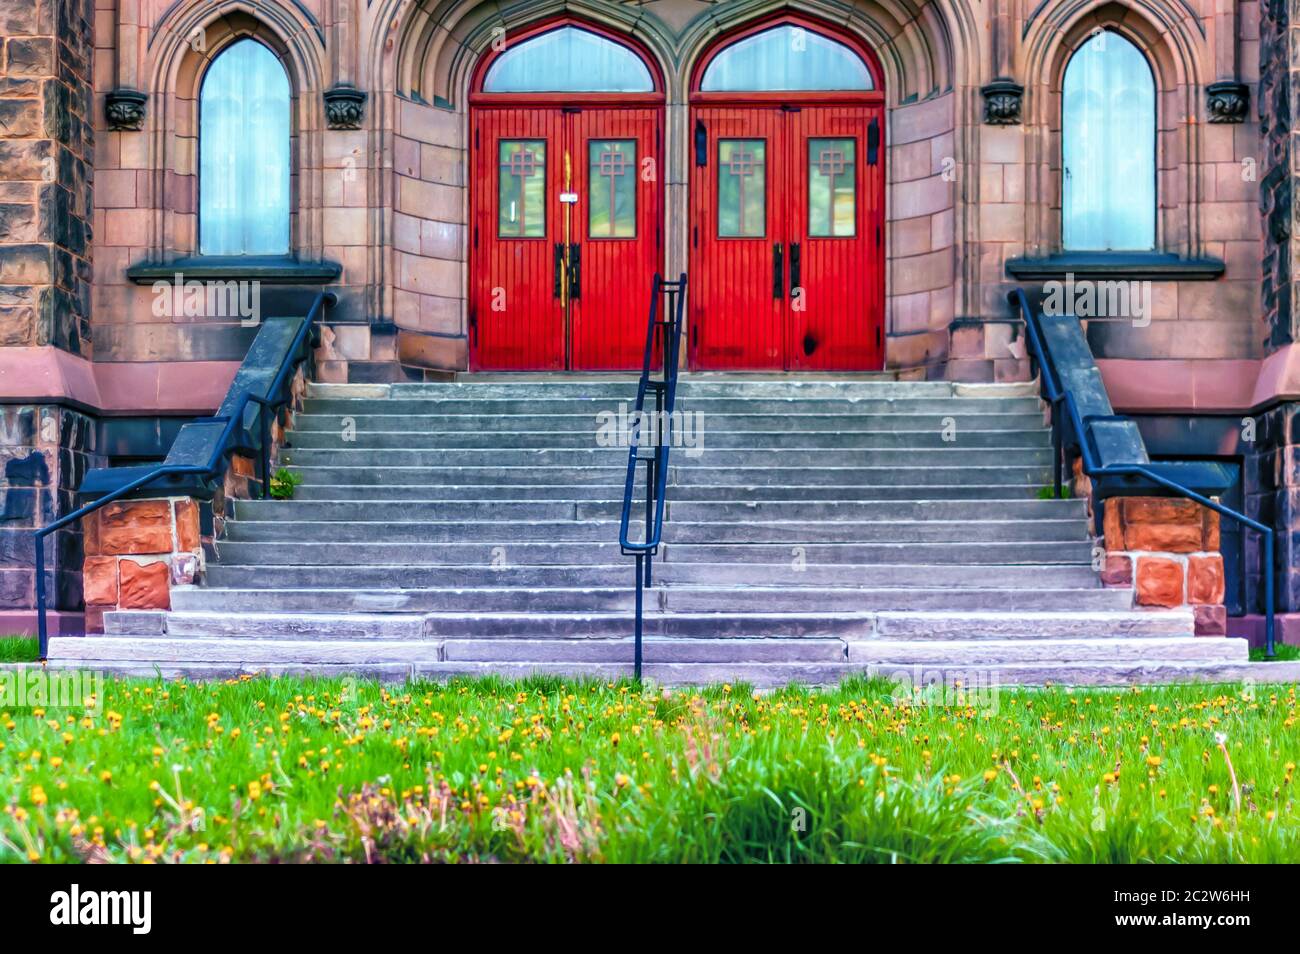 Woodward Avenue Presbyterian Church/ Abyssinia Church of God in Christ located at 8501 Woodward Avenue in Detroit, Michigan. Stock Photo